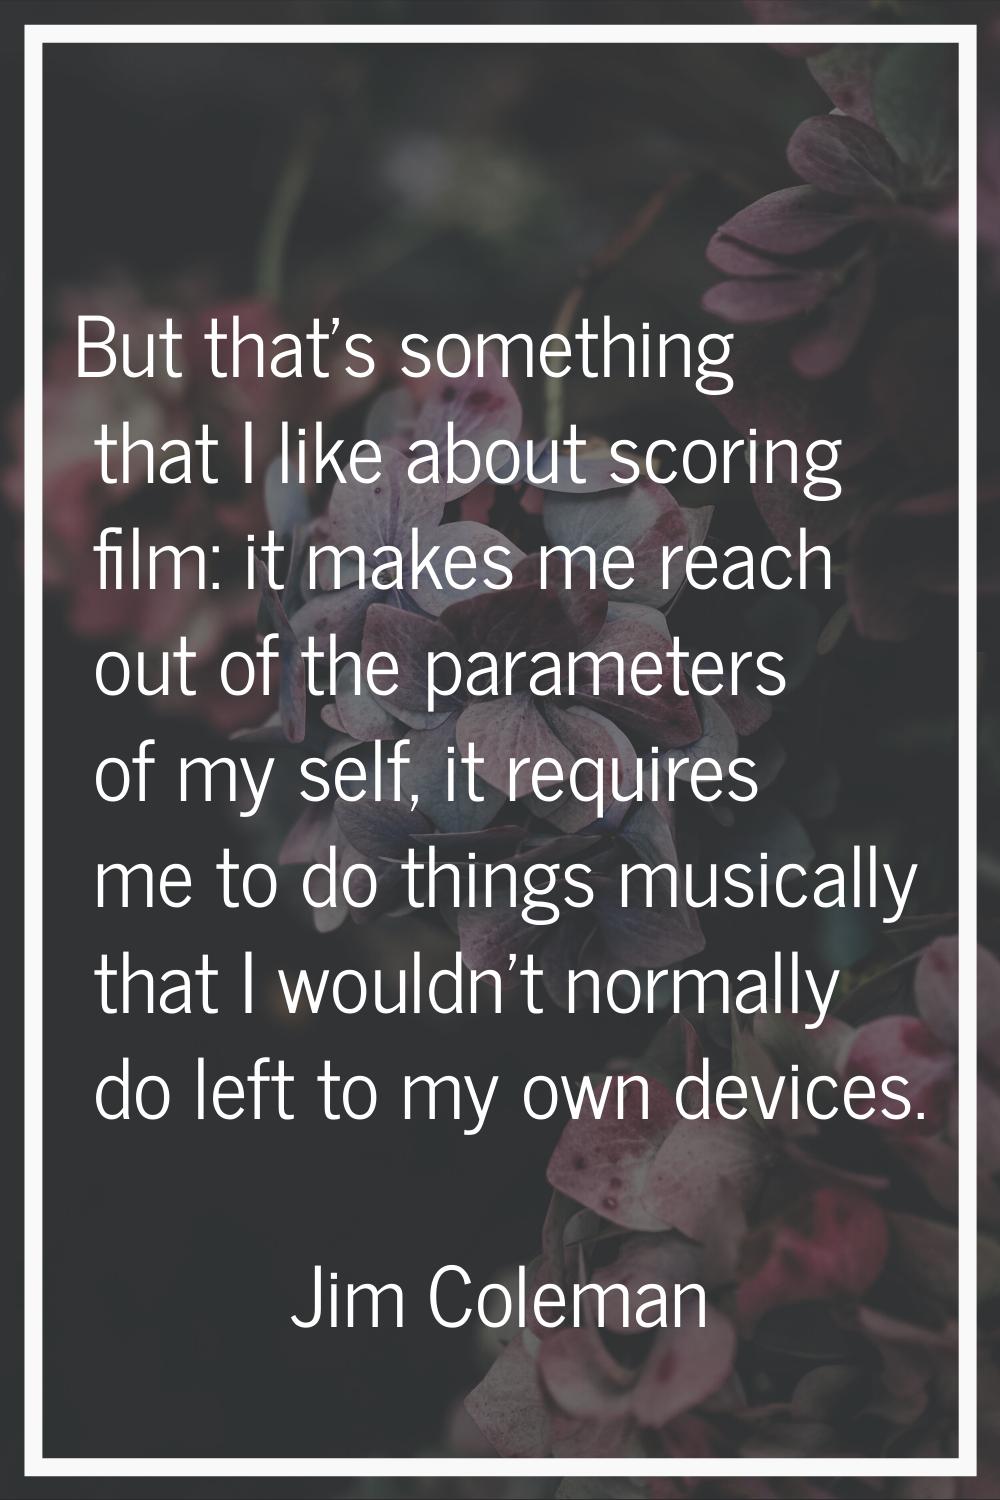 But that's something that I like about scoring film: it makes me reach out of the parameters of my 